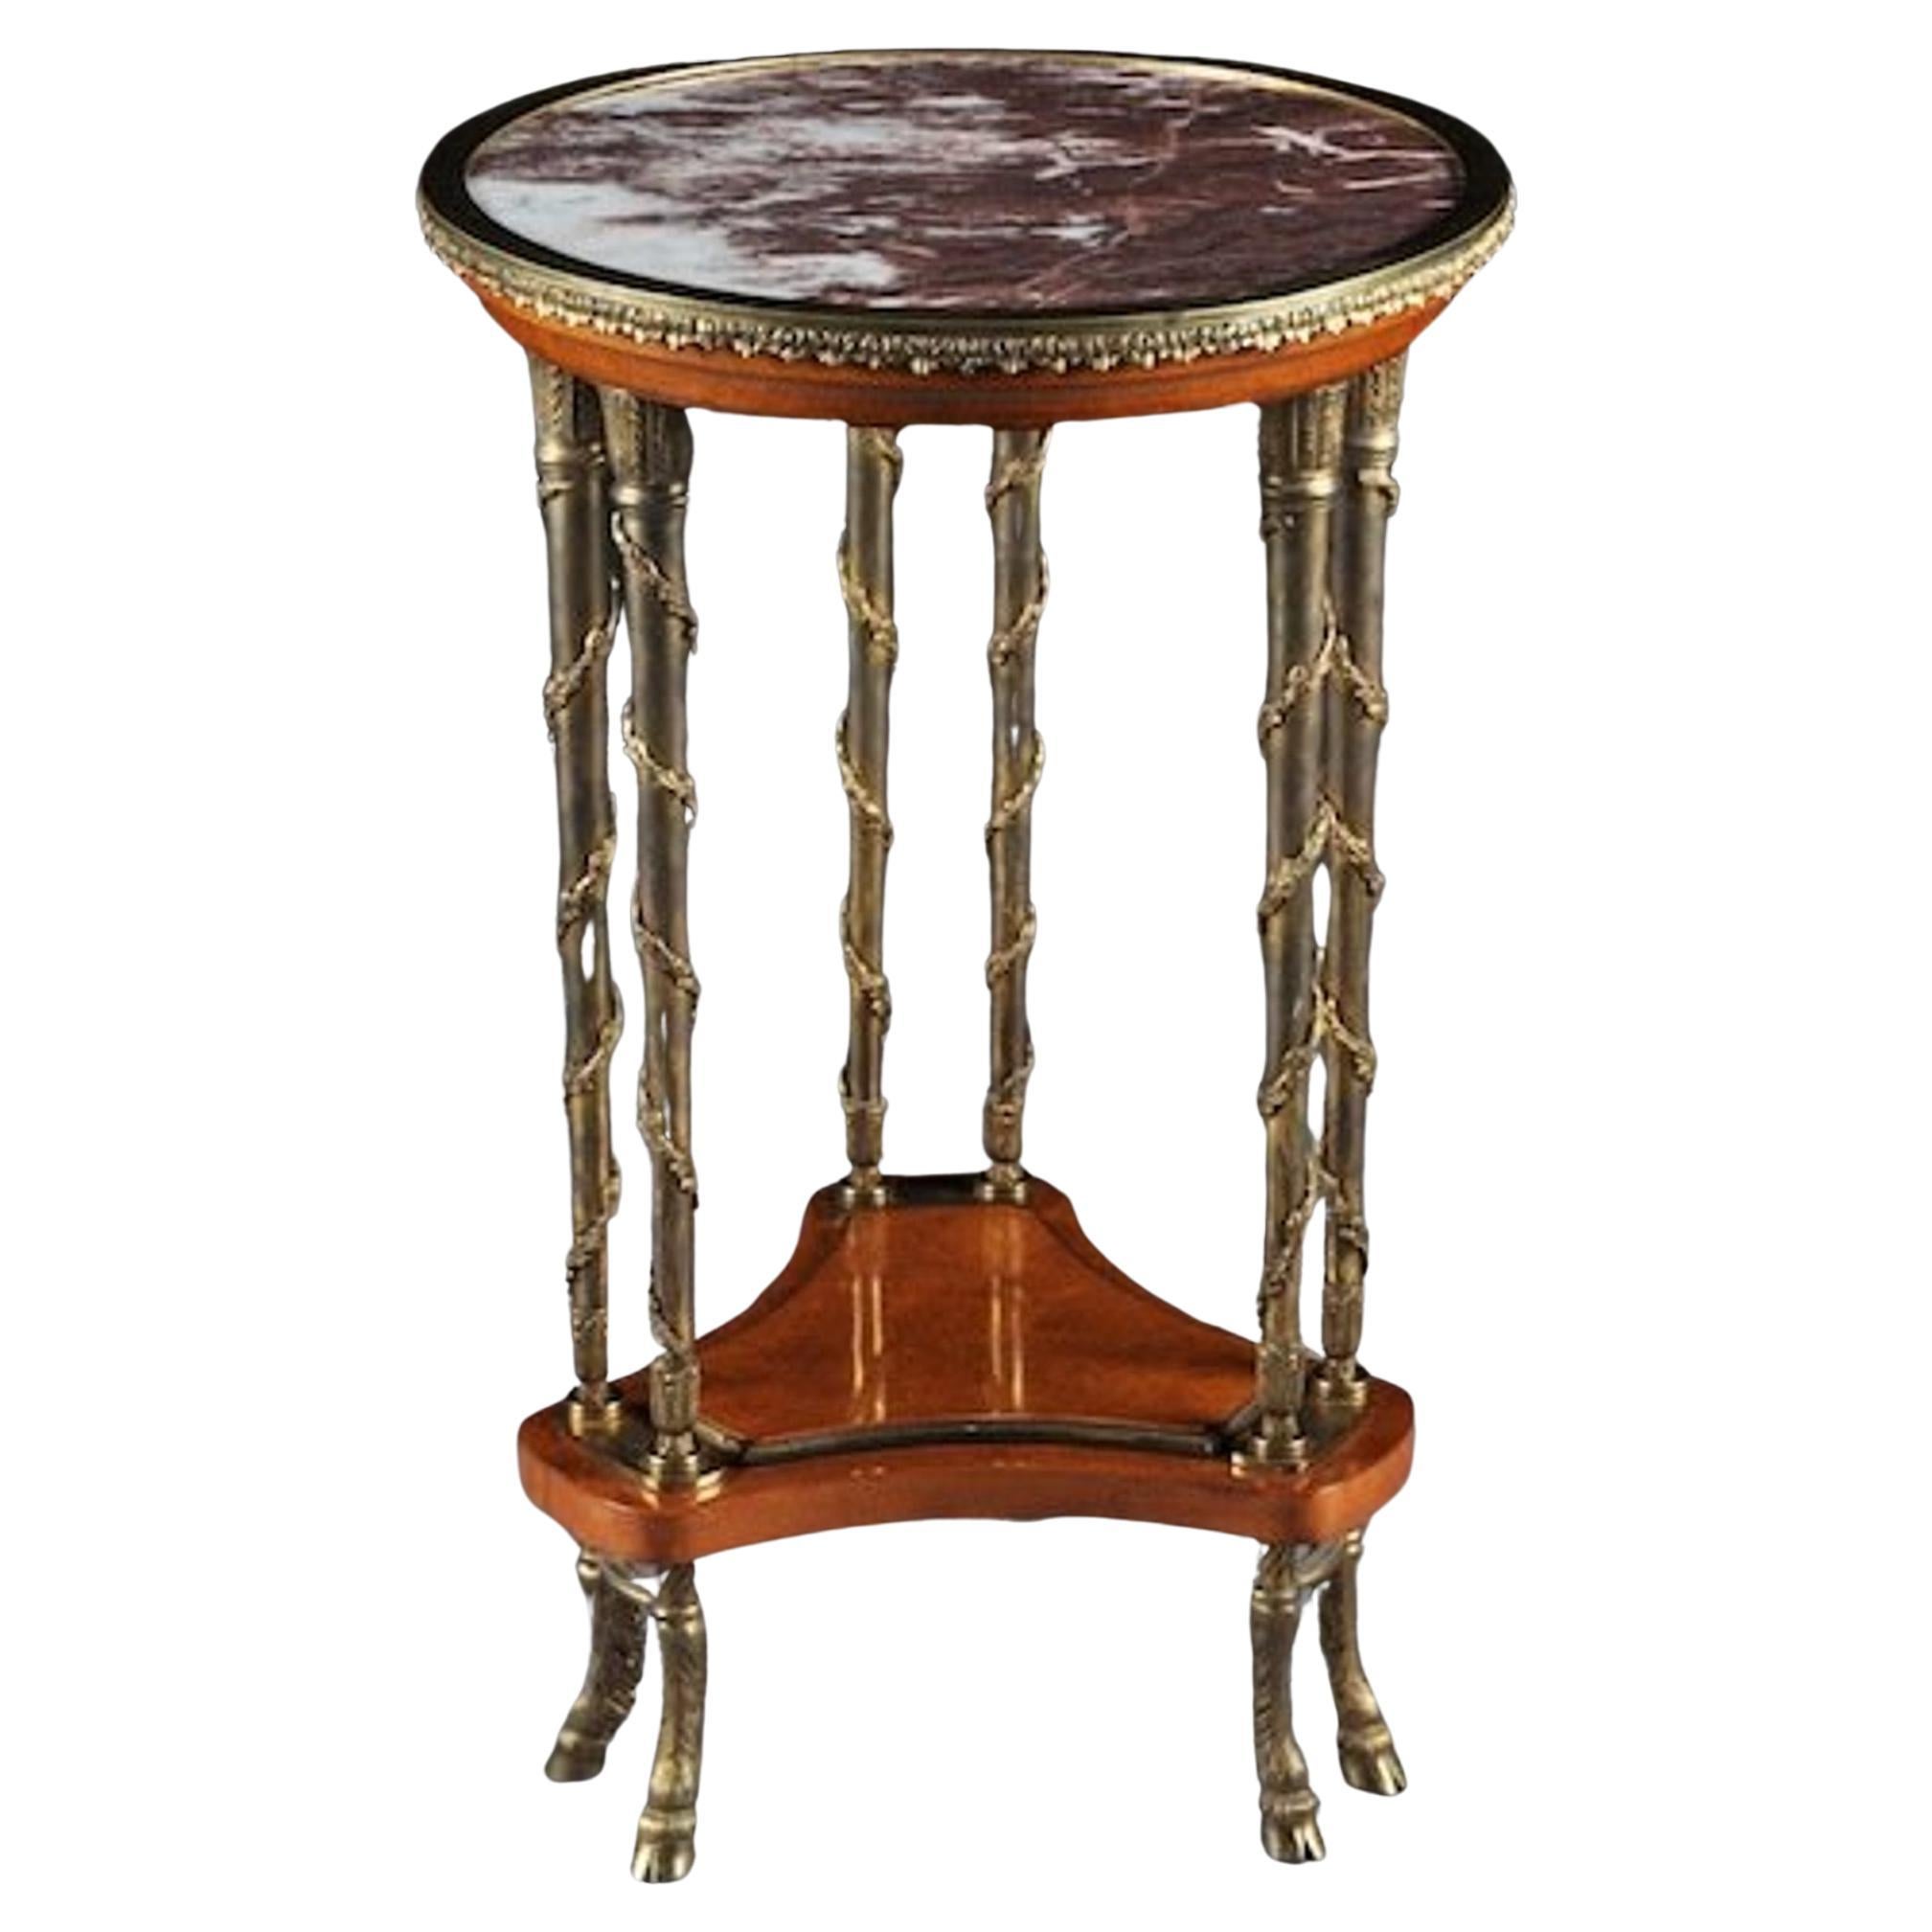 19th Century Louis XVI Style Gilt Bronze Mounted Mahagony Marquetry Side Table